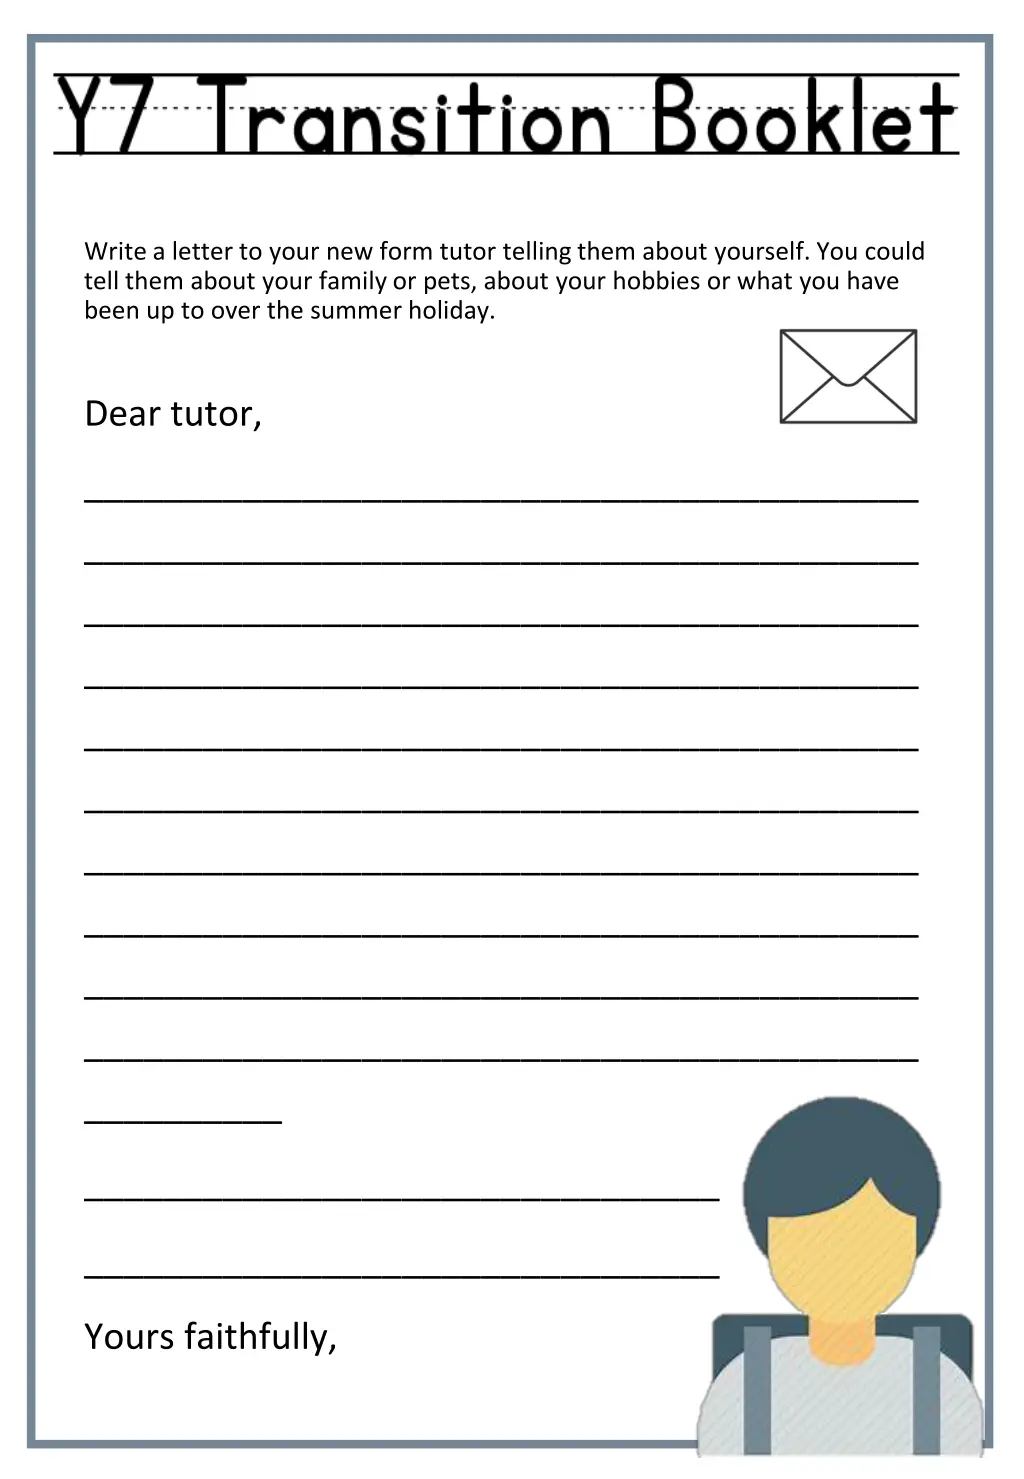 write a letter to your new form tutor telling